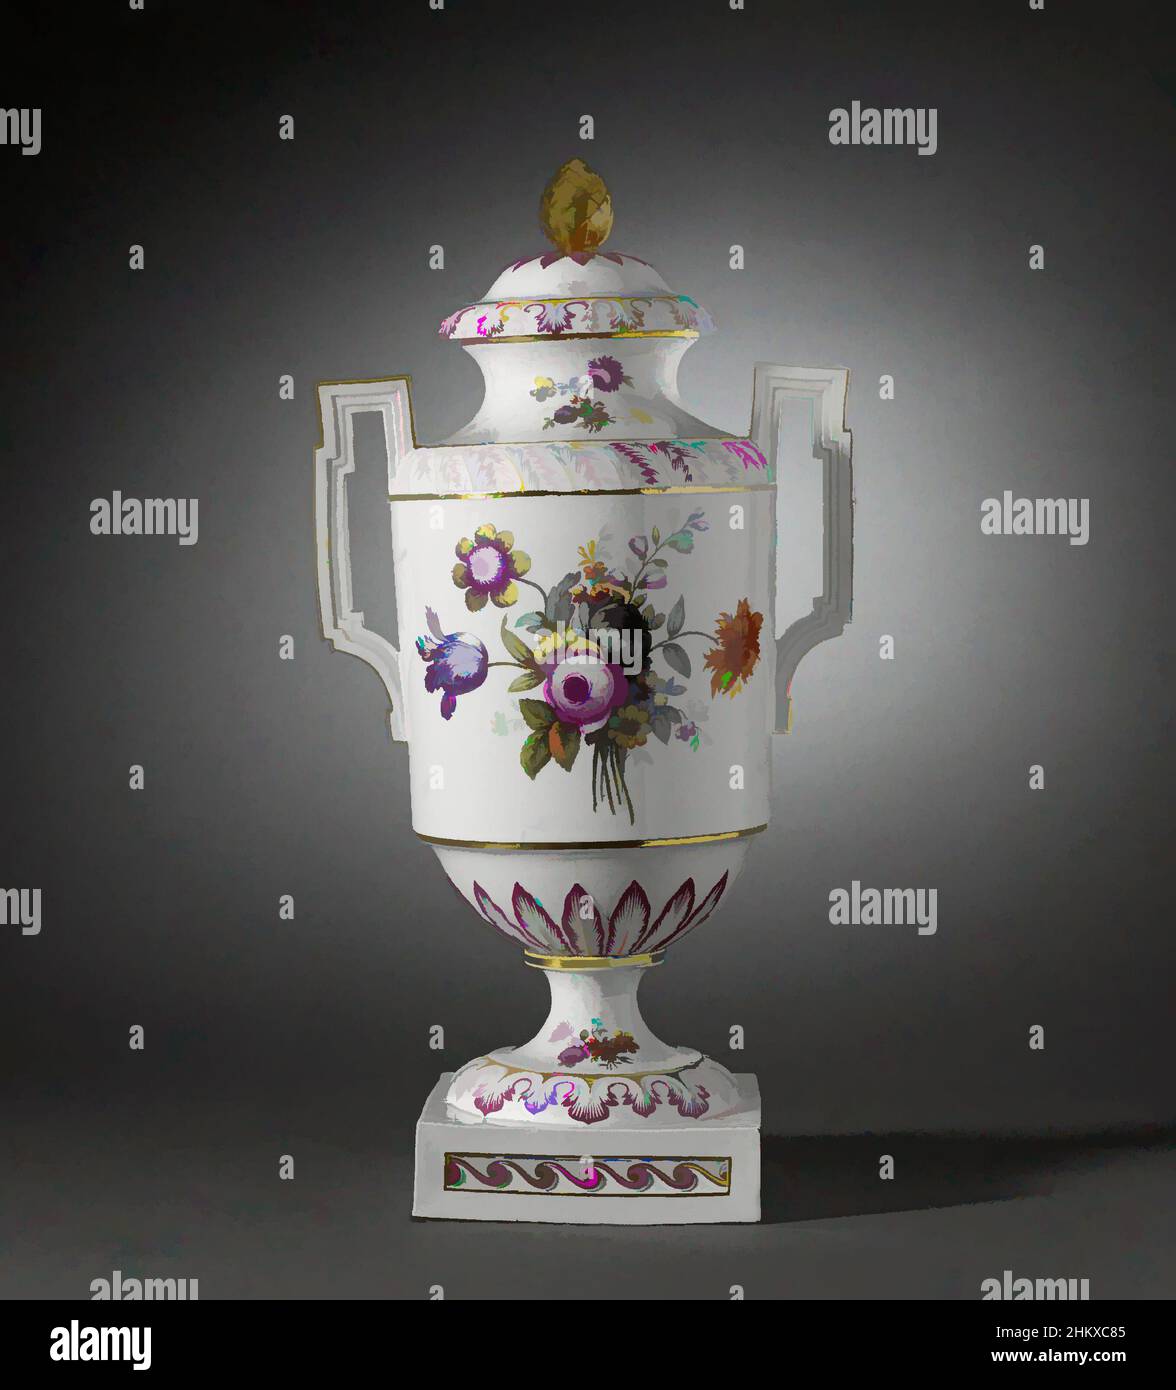 Art inspired by Cover of a vase with flowers and insects, Cover of a vase of porcelain, painted on the glaze in blue, red, pink, green, yellow, purple, black and gold. Decorated with flowers and insects and on the rim modeled leafy vines; lid knob shaped like a pine cone with a modeled, Classic works modernized by Artotop with a splash of modernity. Shapes, color and value, eye-catching visual impact on art. Emotions through freedom of artworks in a contemporary way. A timeless message pursuing a wildly creative new direction. Artists turning to the digital medium and creating the Artotop NFT Stock Photo